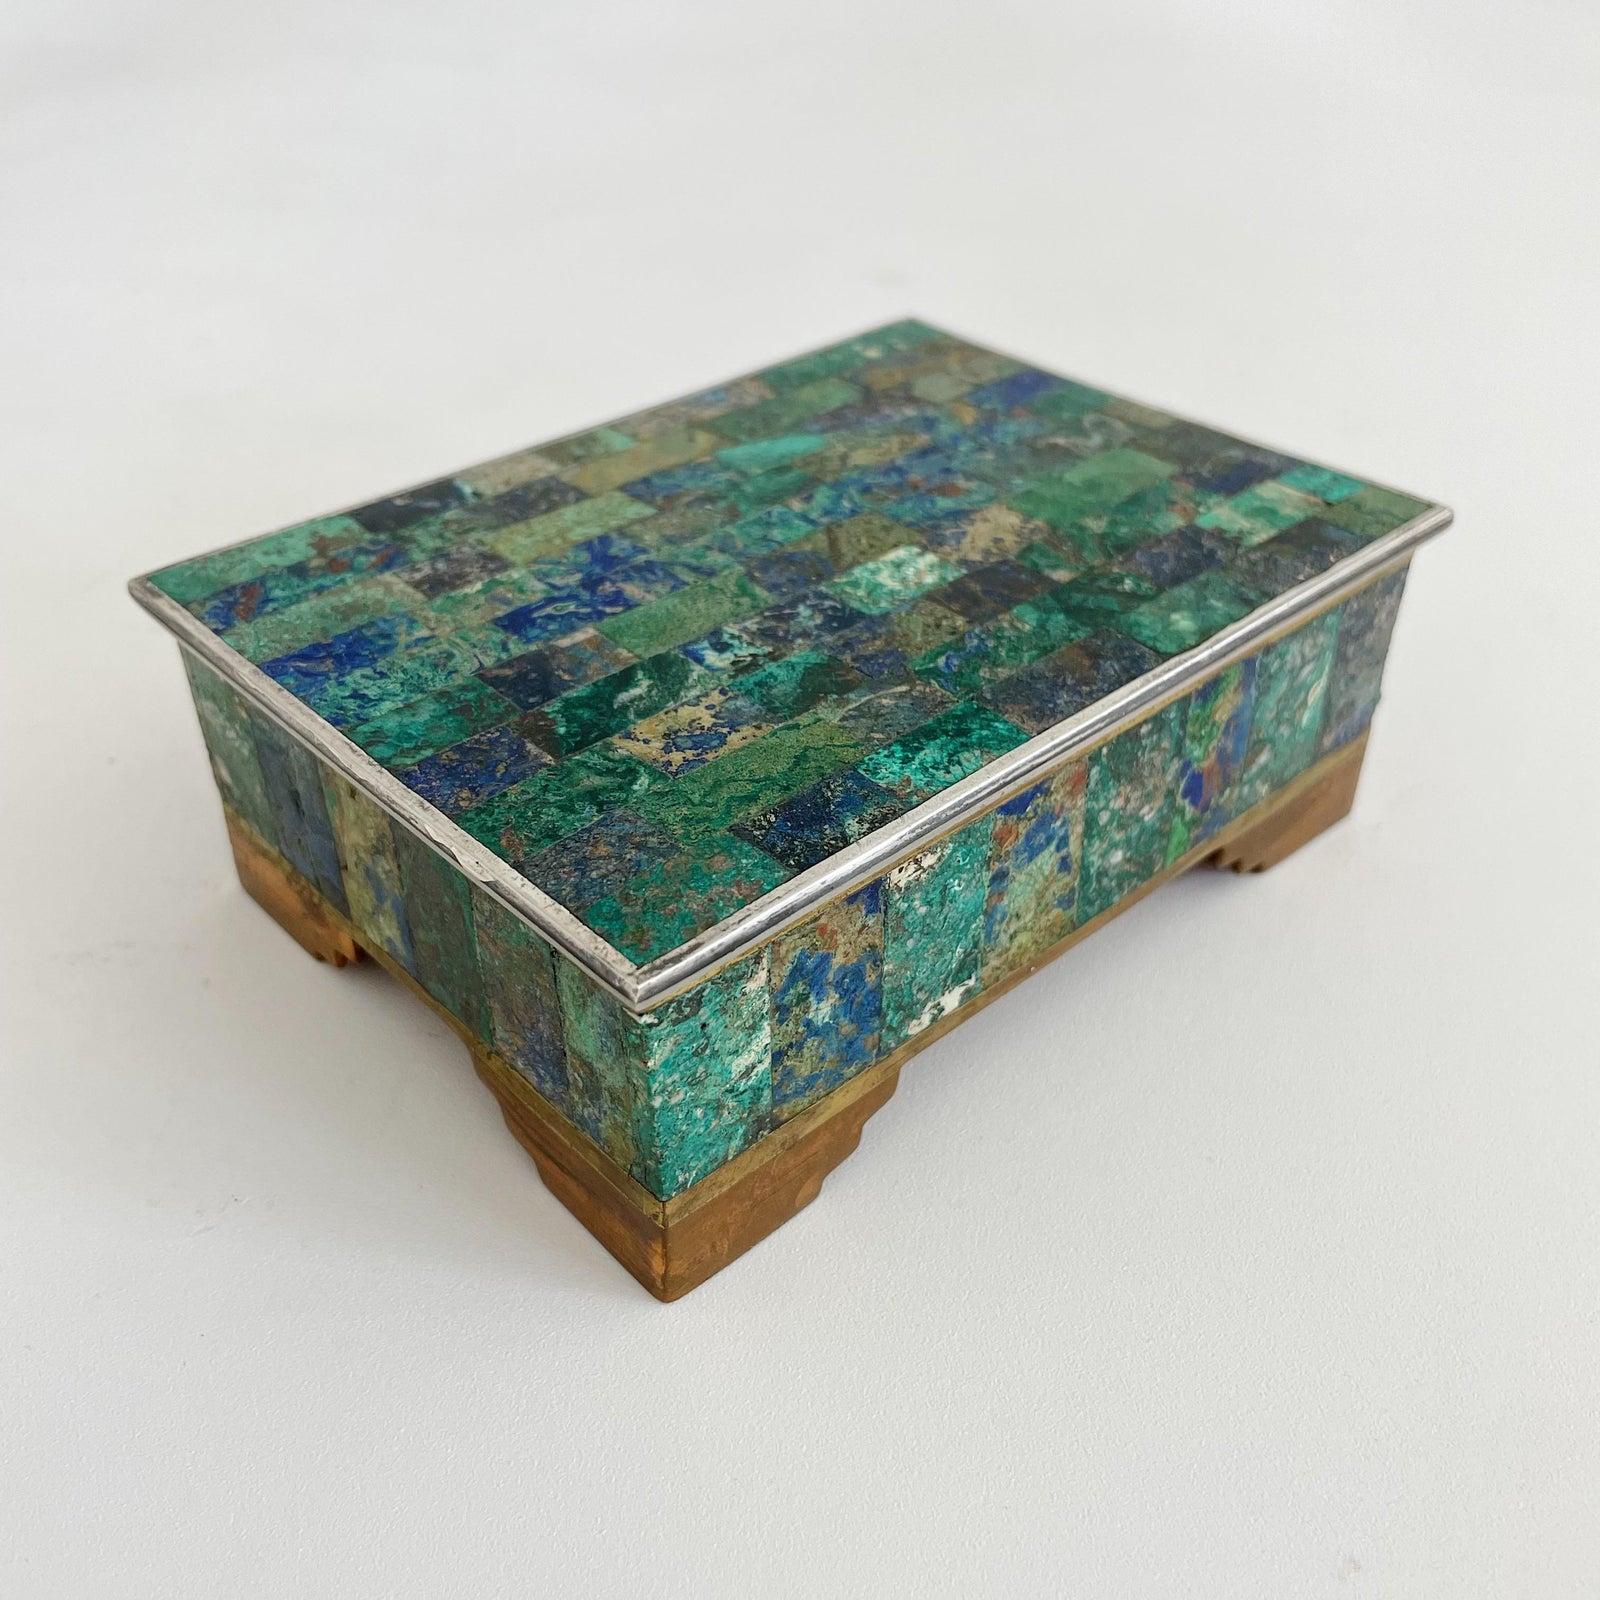 Brass, copper, and silver-plate ornate hinged jewelry box with malachite & lapis lazuli inlay. Made by Los Castillos in Taxco Mexico
Stamped on underside : 210 LOS CASTILLO, TAXCO, HECHO EN MEXICO.